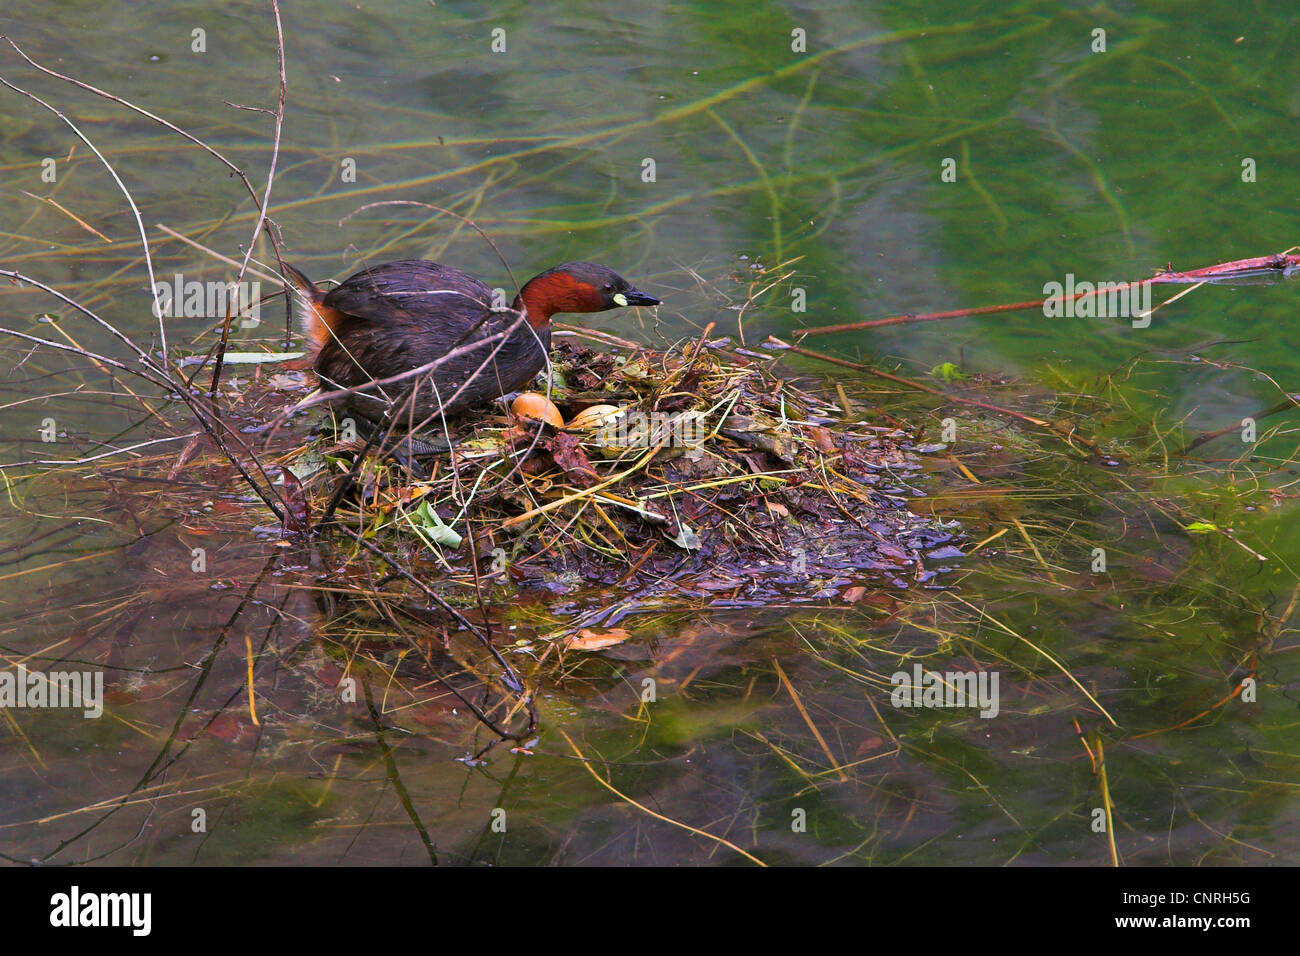 little grebe (Podiceps ruficollis, Tachybaptus ruficollis), with eggs in the nest, Germany Stock Photo